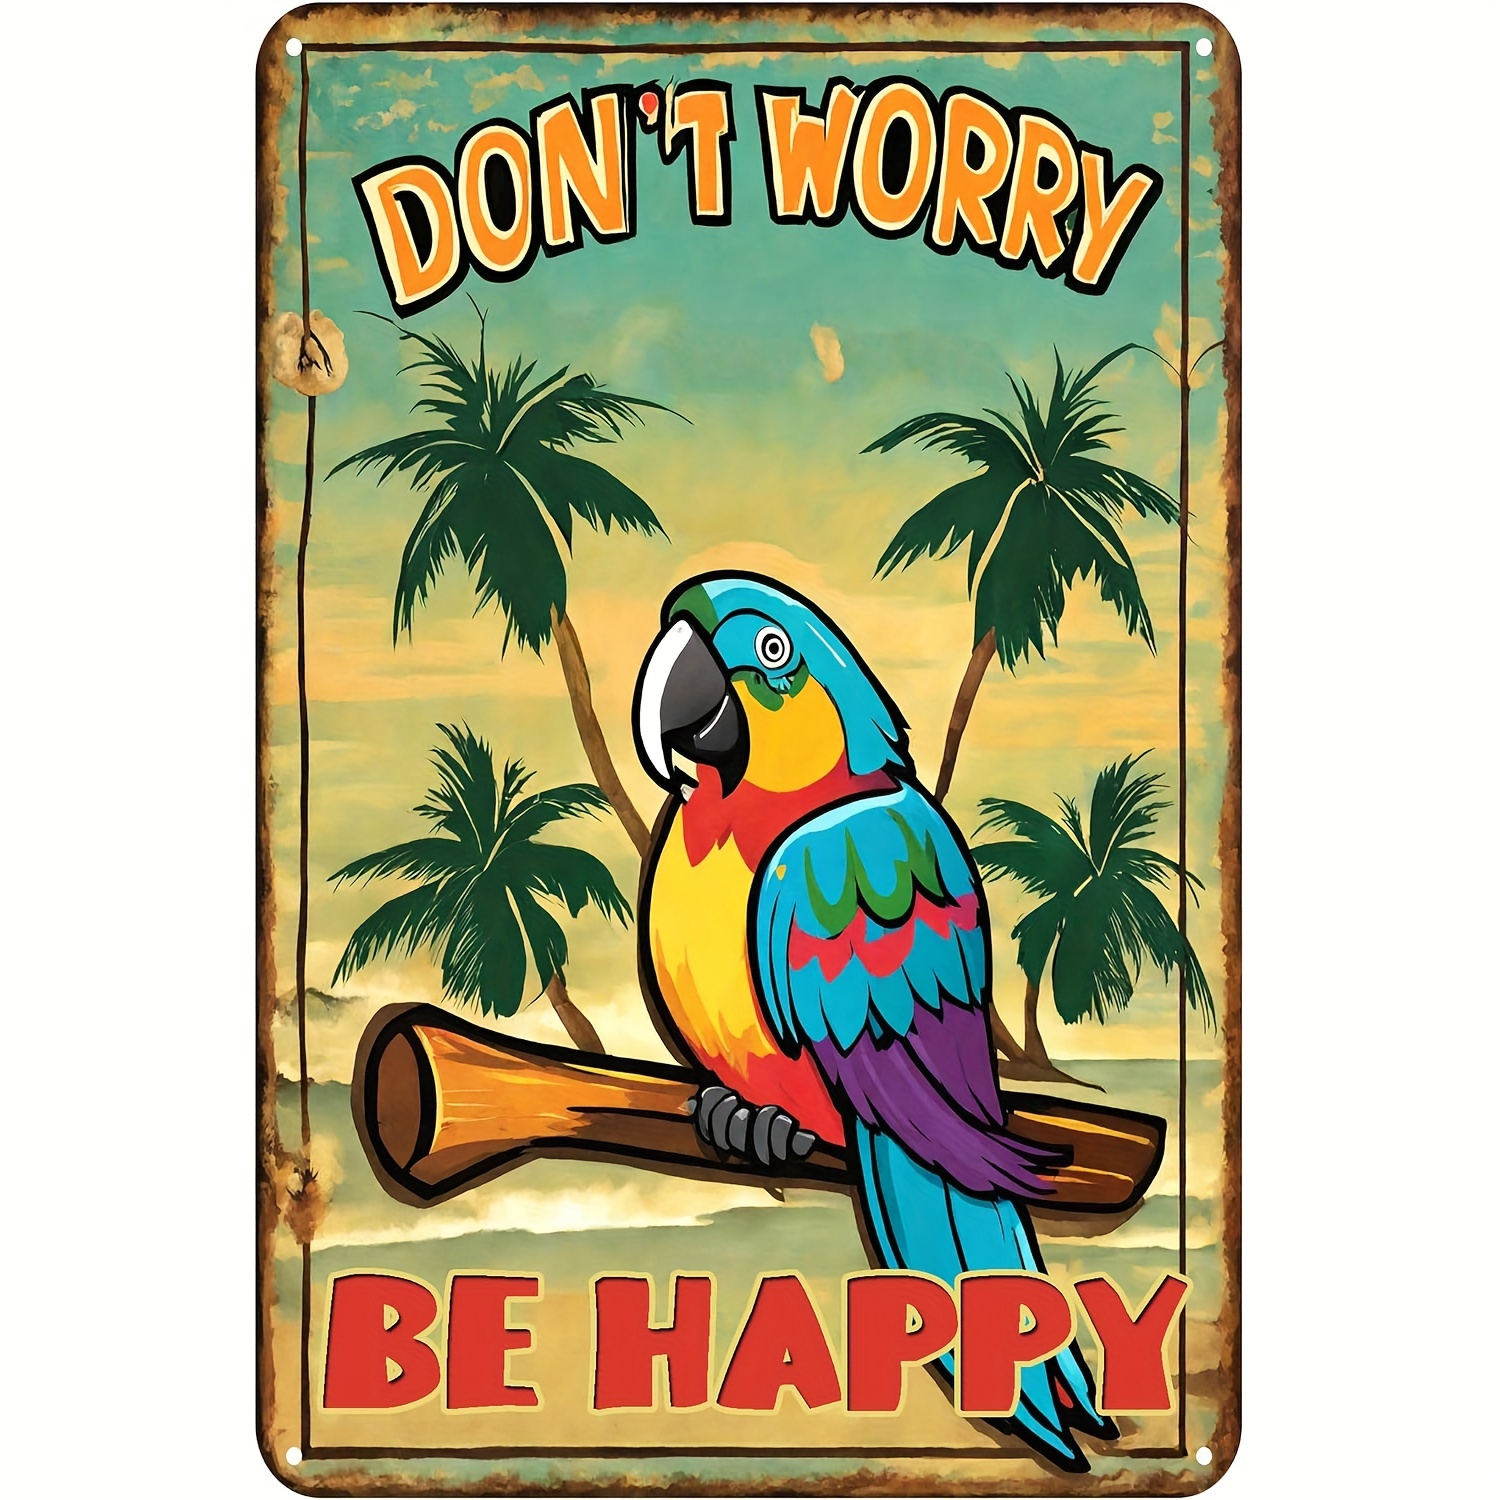 

1pc Retro Metal Aluminum Sign, Don't Worry Be Happy The Beach Parrot Tin Sign, Summer Wall Art Decor, Vintage Garage Wall Decor, Restaurant Decoration, Cafe Bar Club Living Room Wall Decor Plaque